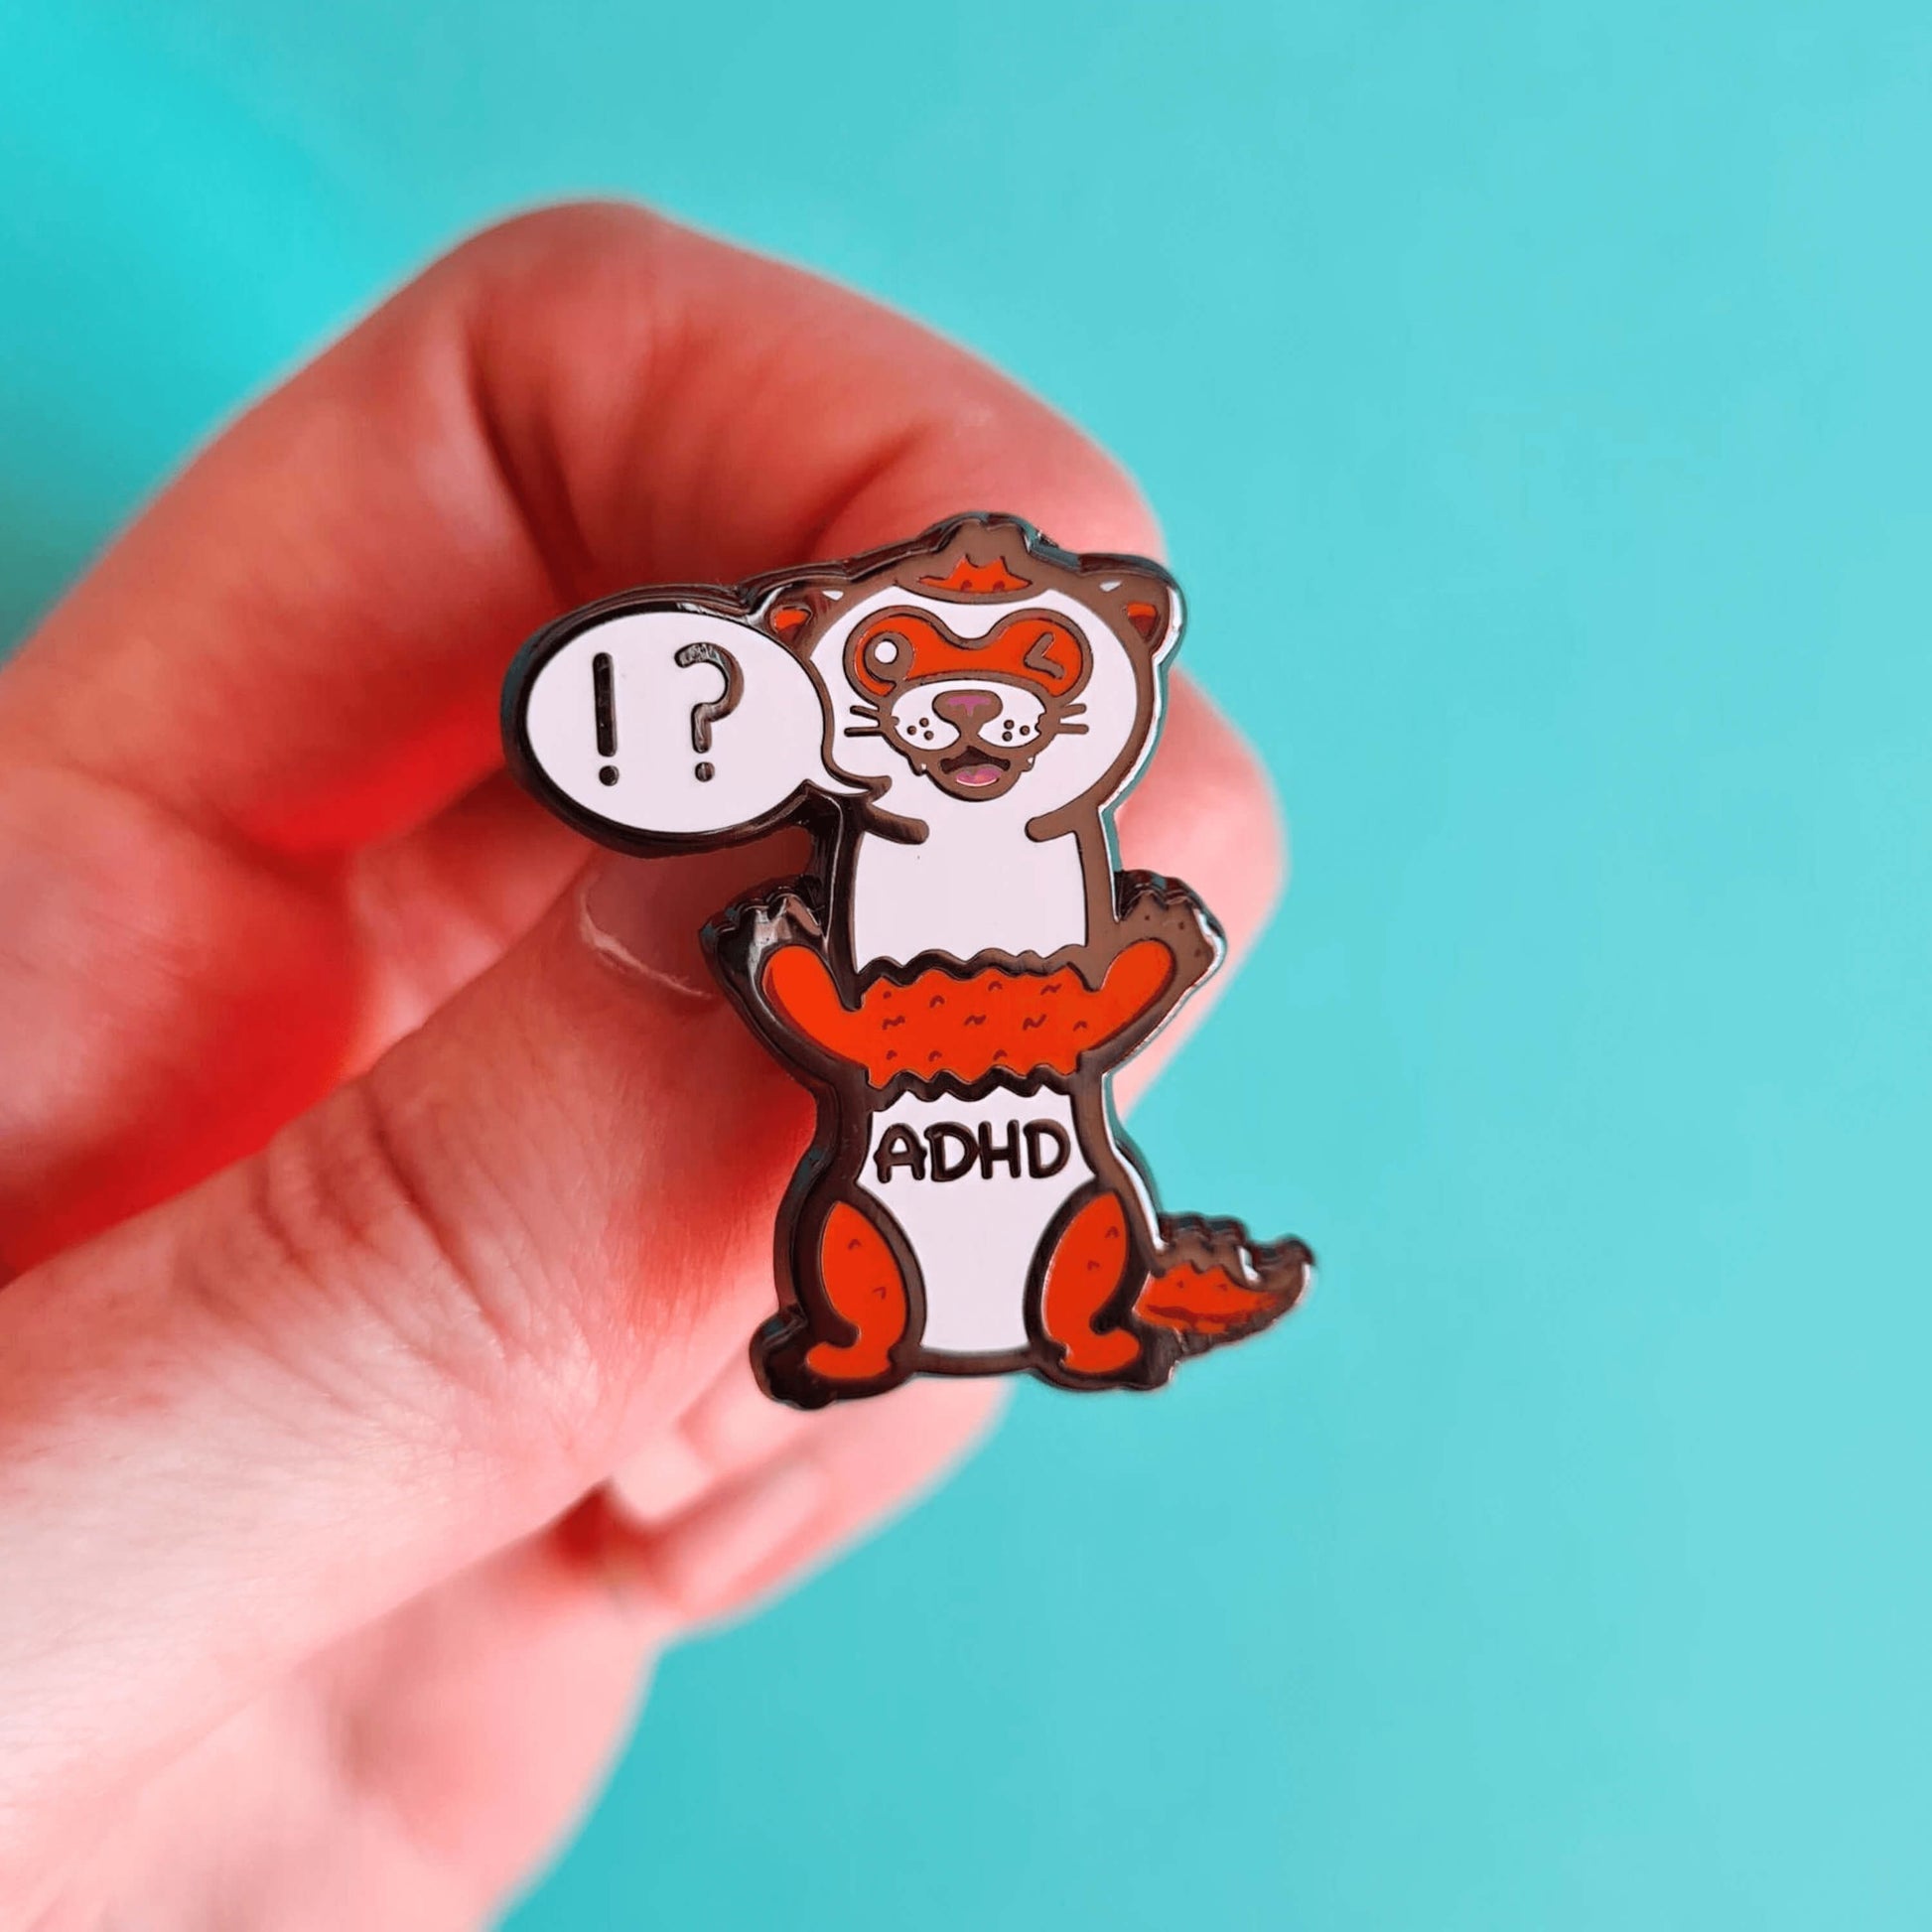 A red and white ferret enamel pin with it's mouth open in a smile and it's little teeth are showing. One of it's eyes are closed shut and it is standing on it's back legs. There is a speech-bubble from the ferret's mouth with '!?' inside it. The enamel pin is being held over a blue background. Raising awareness for ADHD - Attention deficit hyperactivity disorder.